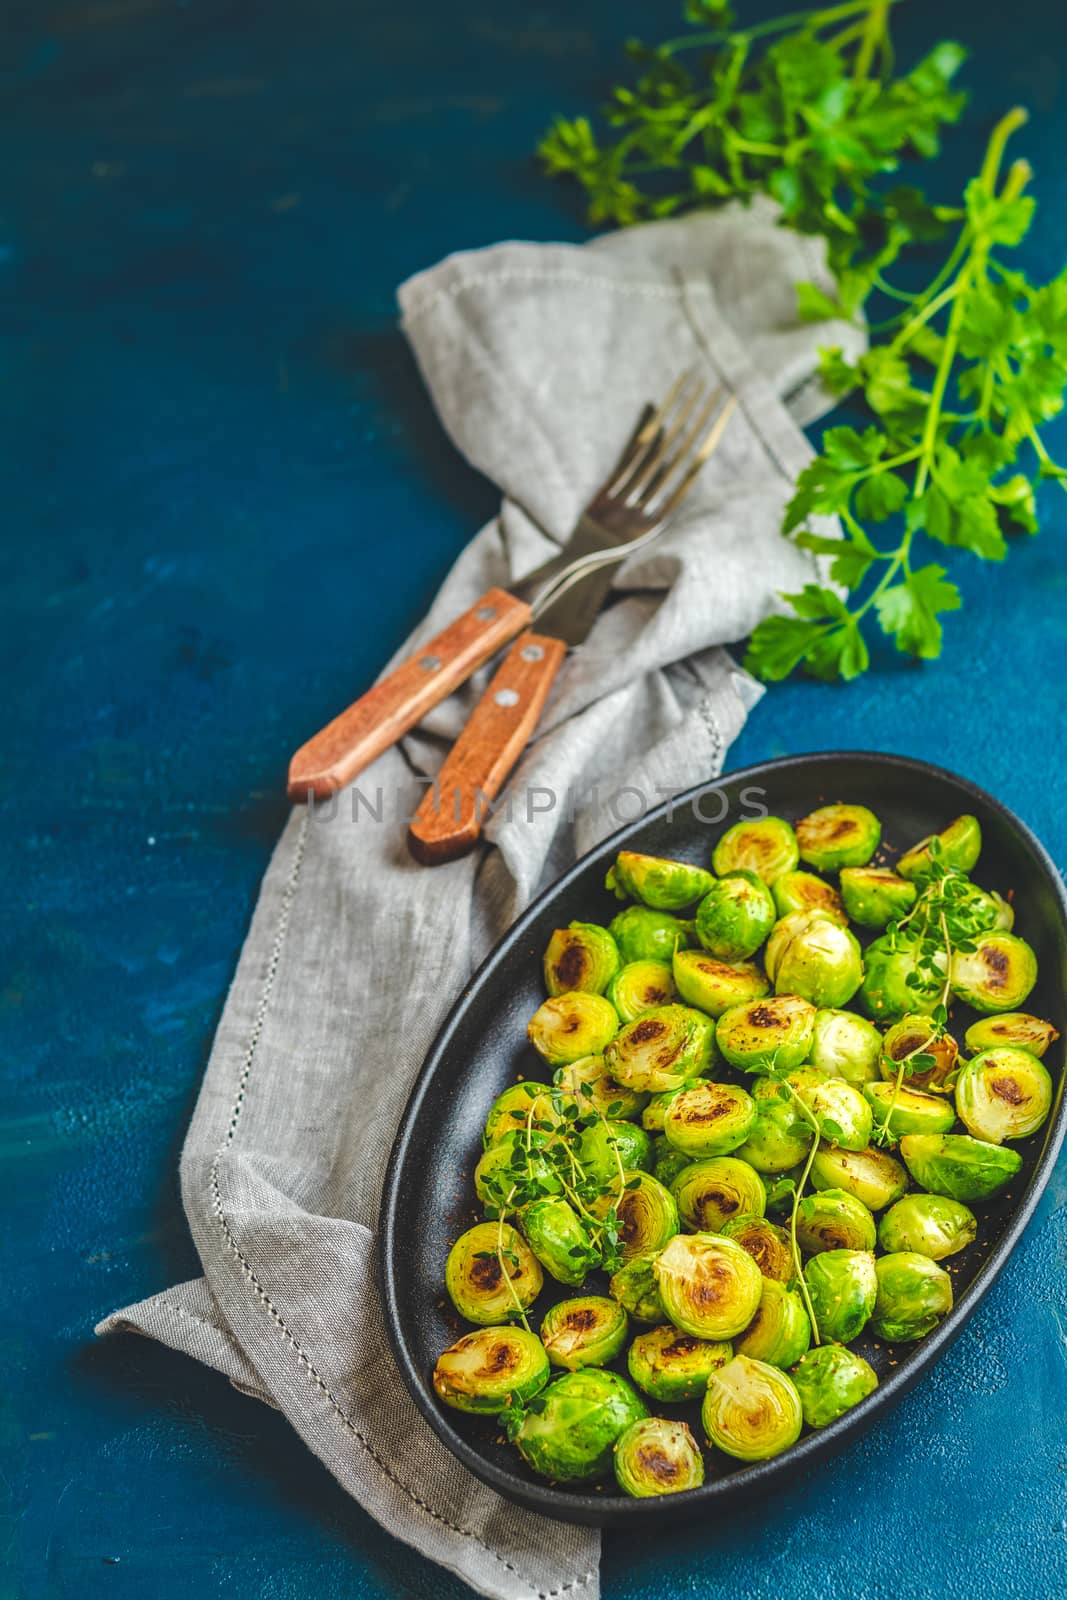 Black plate with delicious roasted Brussels sprouts in served on black plate, dark blue concrete table surface, copy space for you text.